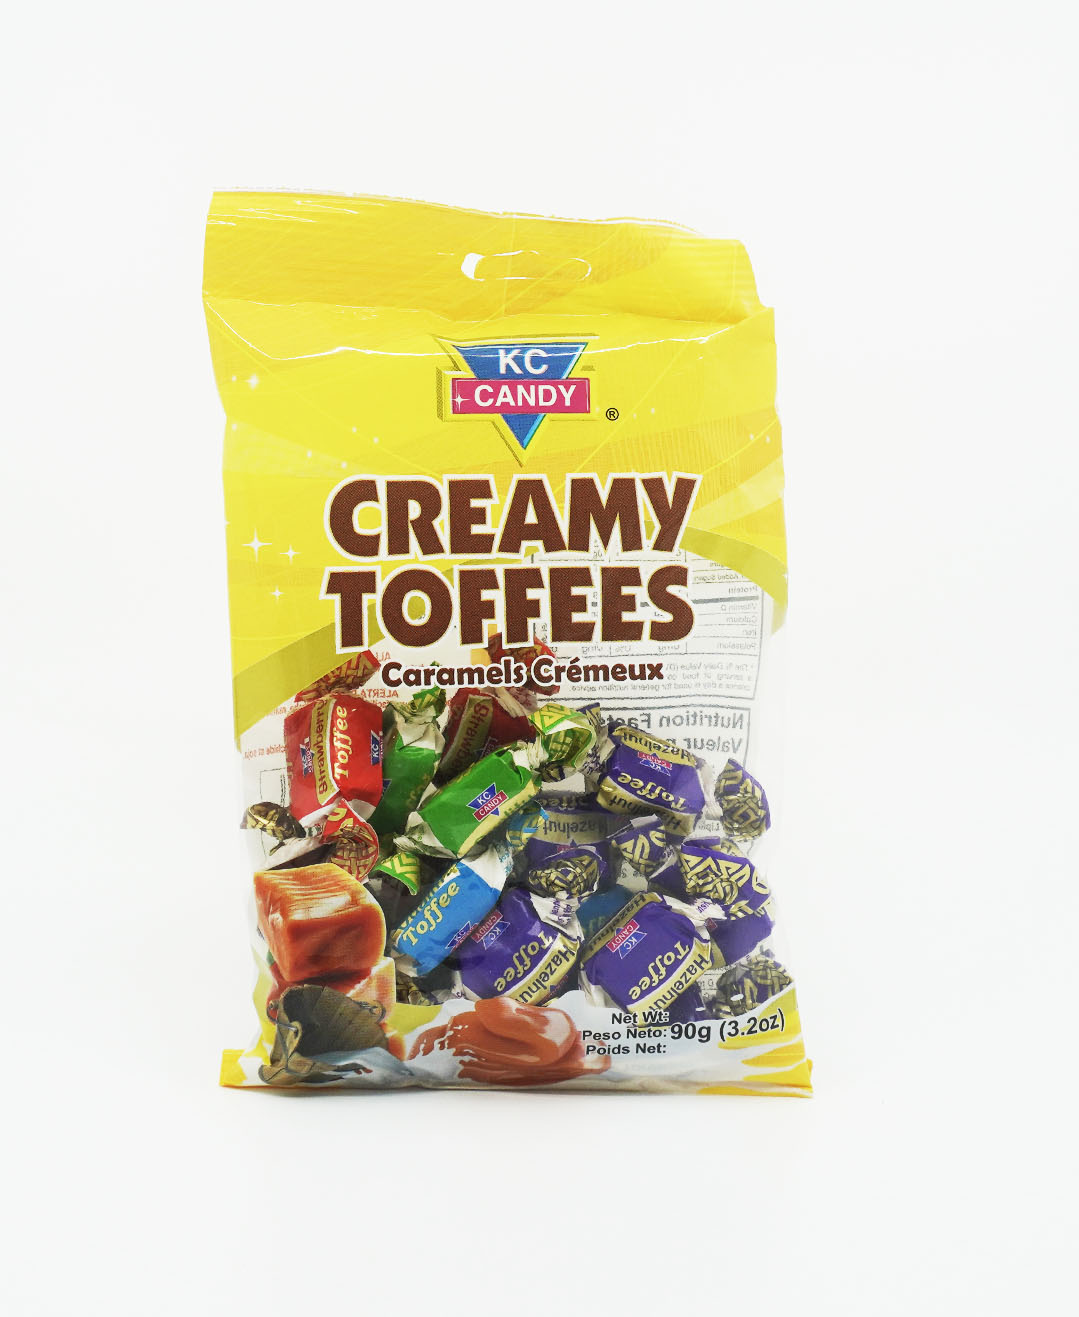 Kc Candy Creamy Toffee 90G